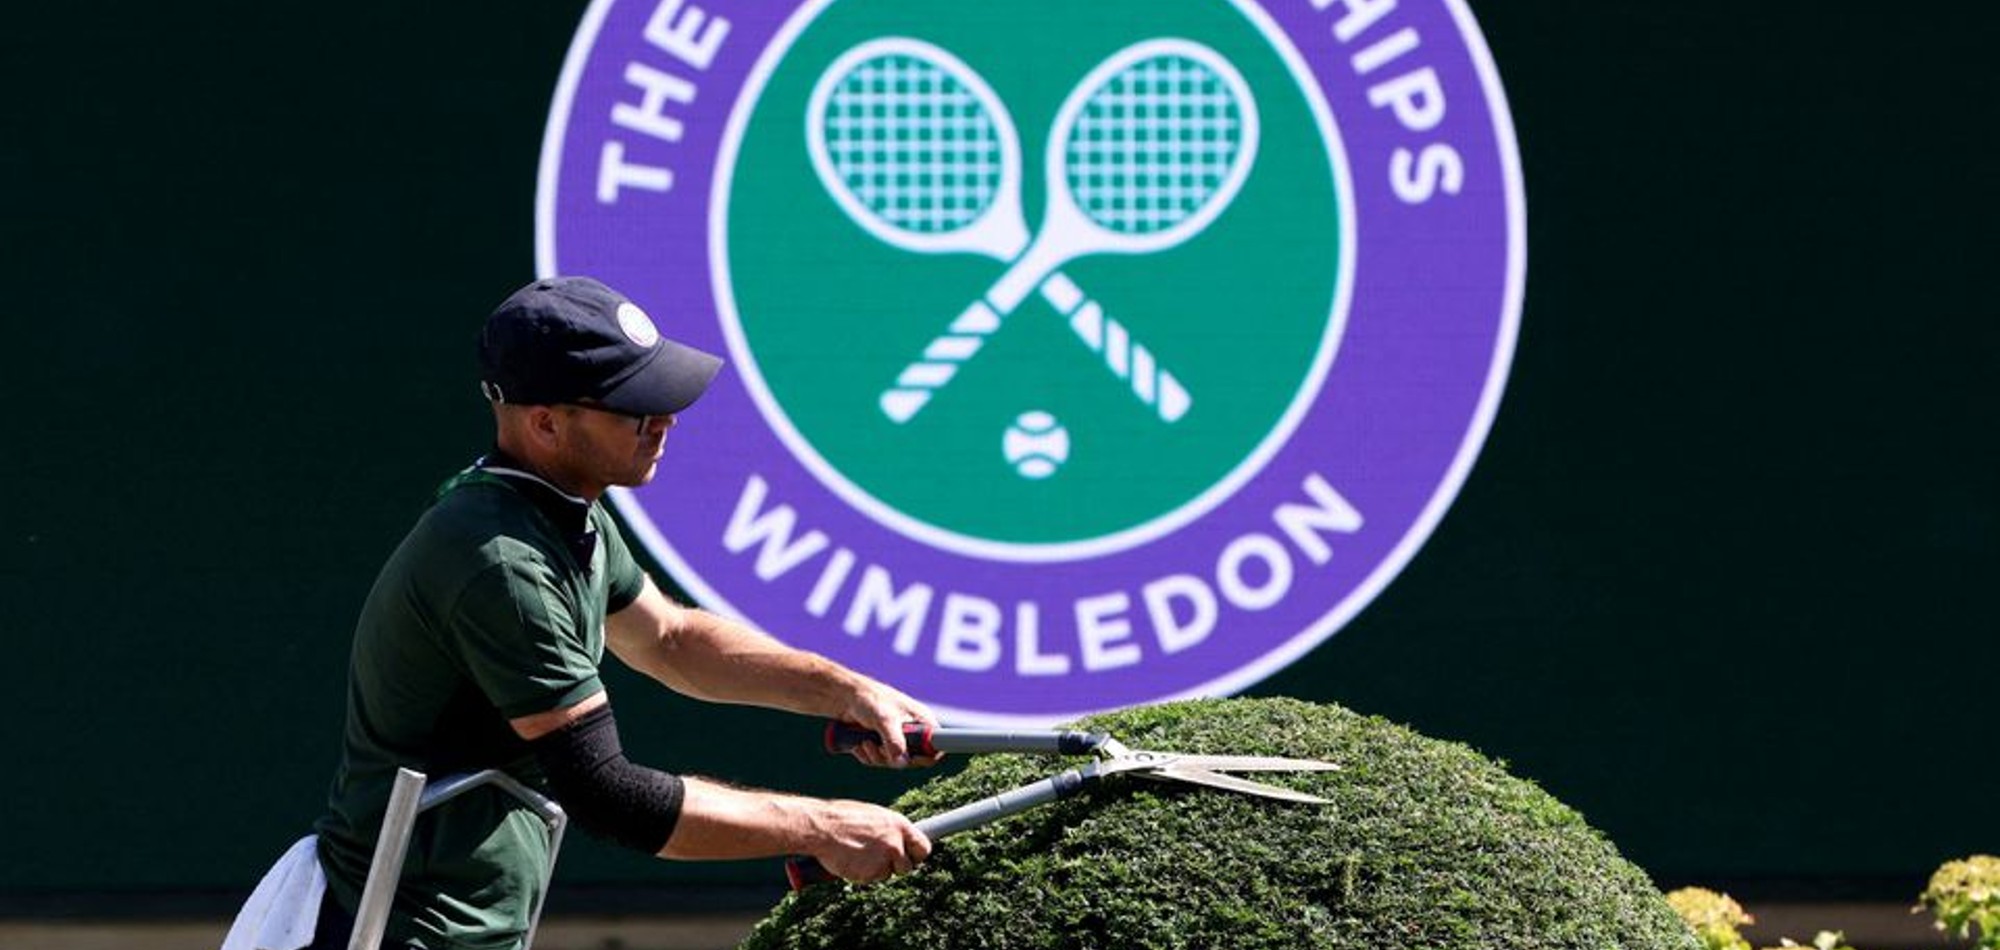 No ranking points on offer but Wimbledon no exhibition